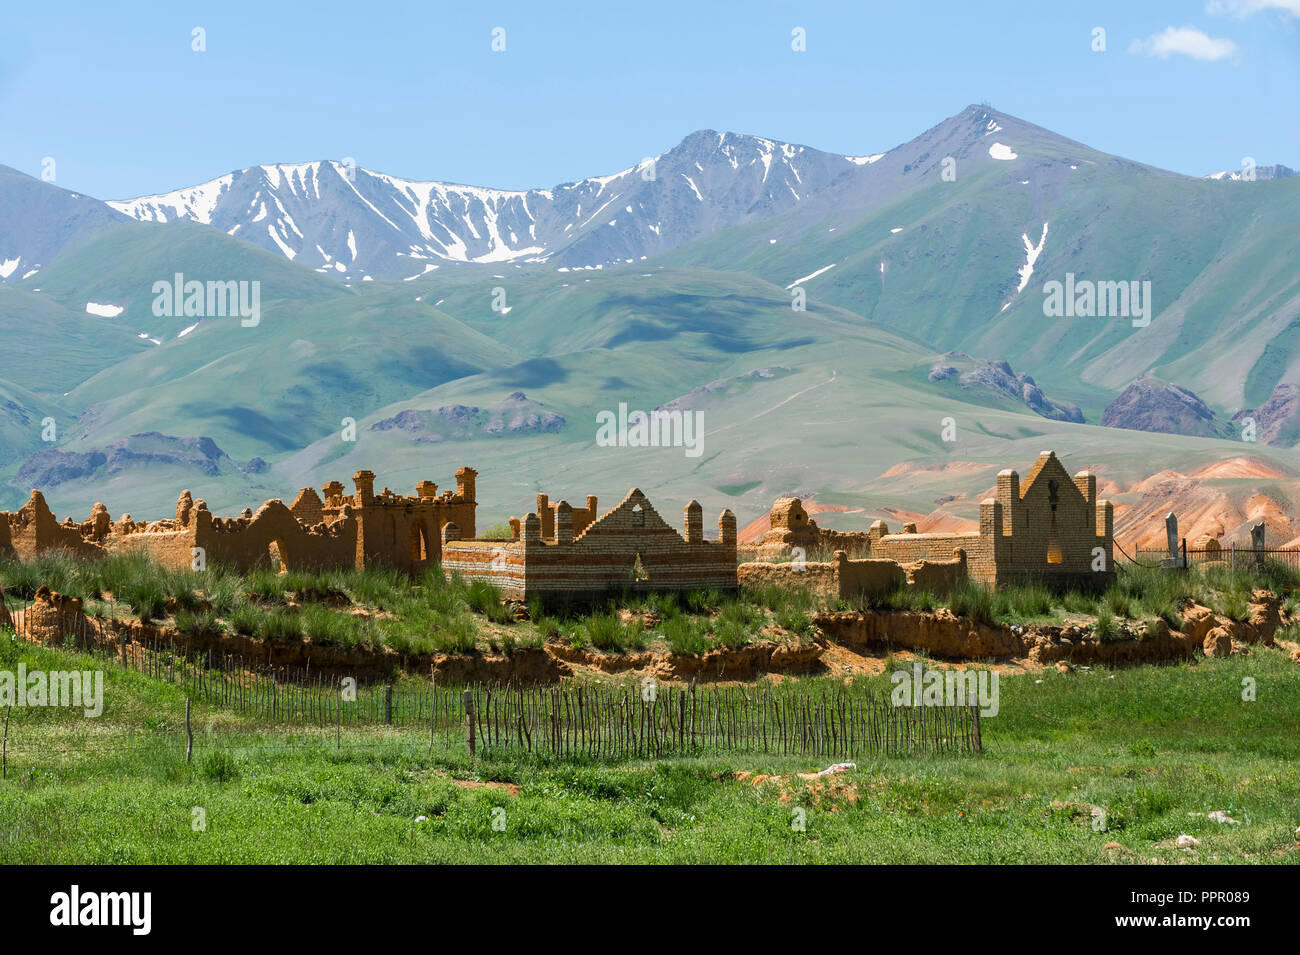 Cemetery in the Kochkor area, Road to Song Kol Lake, Naryn province, Kyrgyzstan, Central Asia Stock Photo